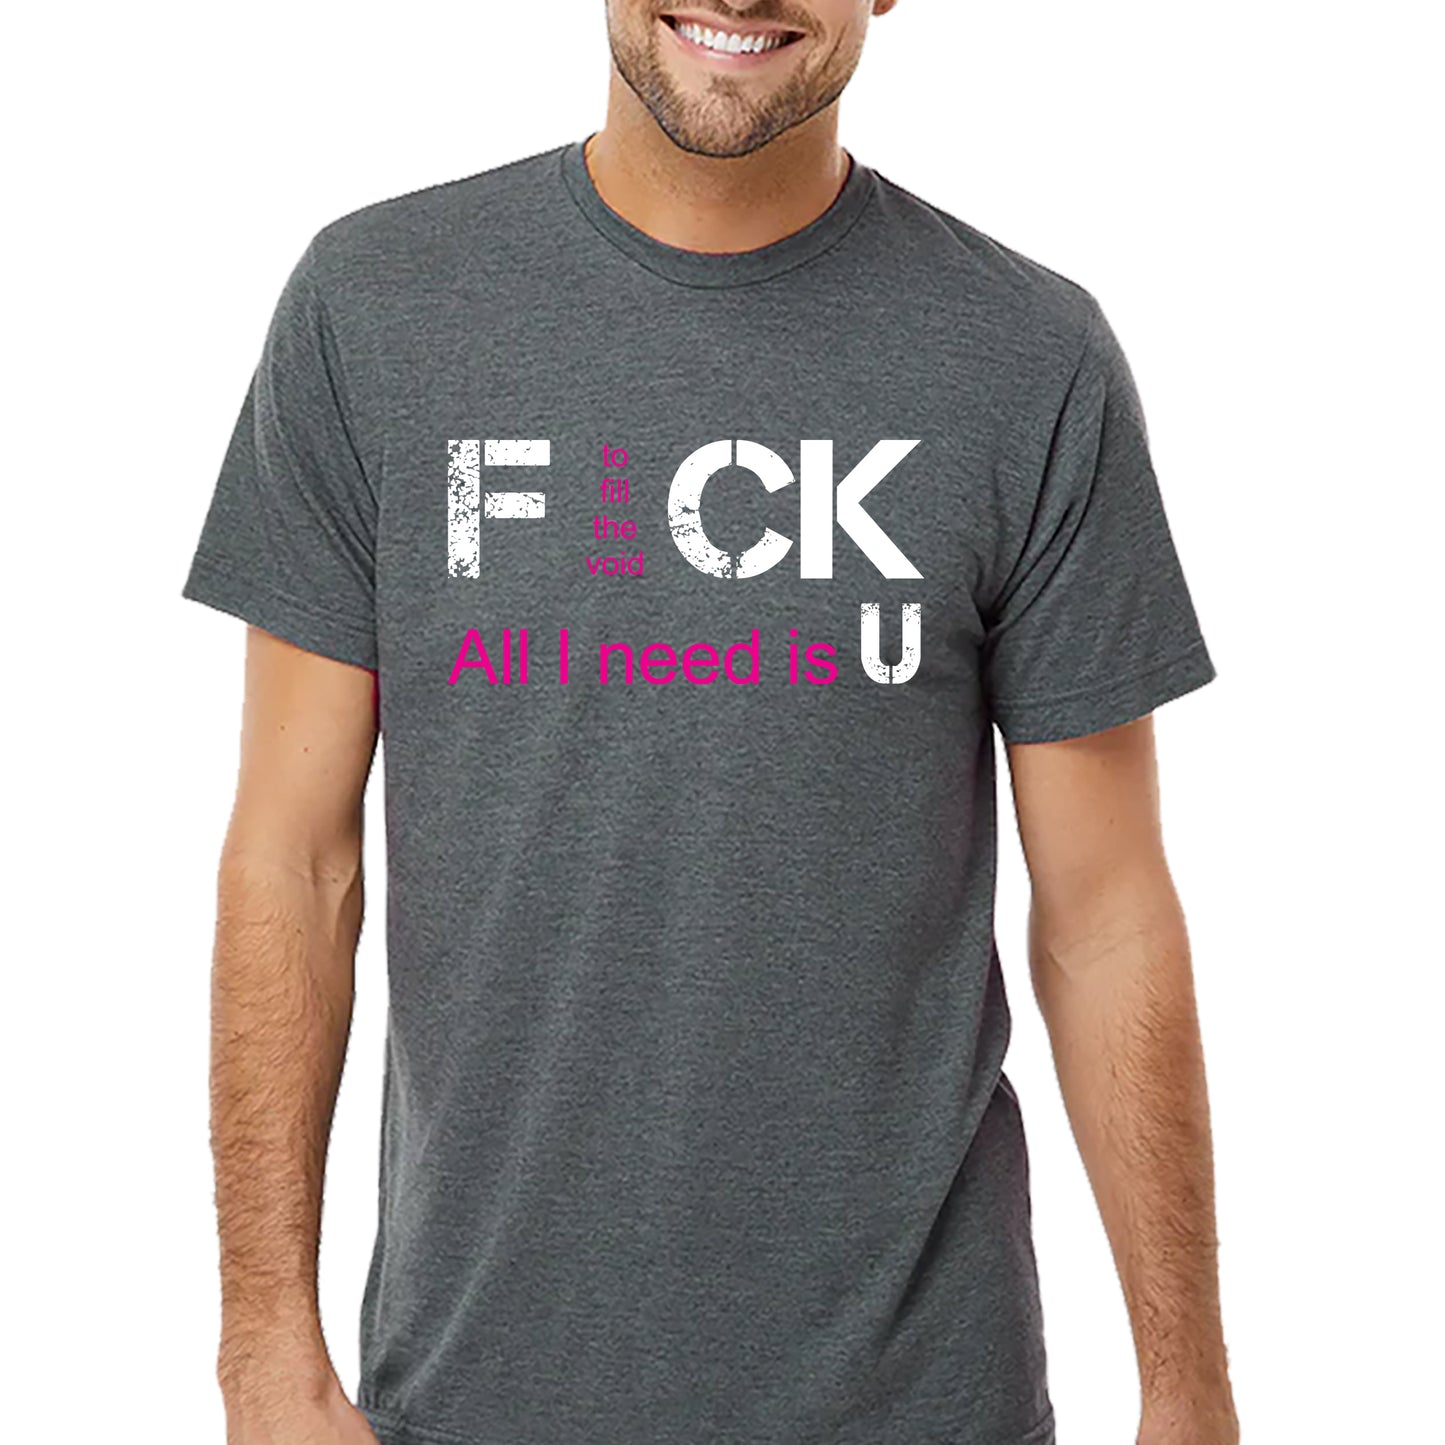 All I Need Is You T-shirt